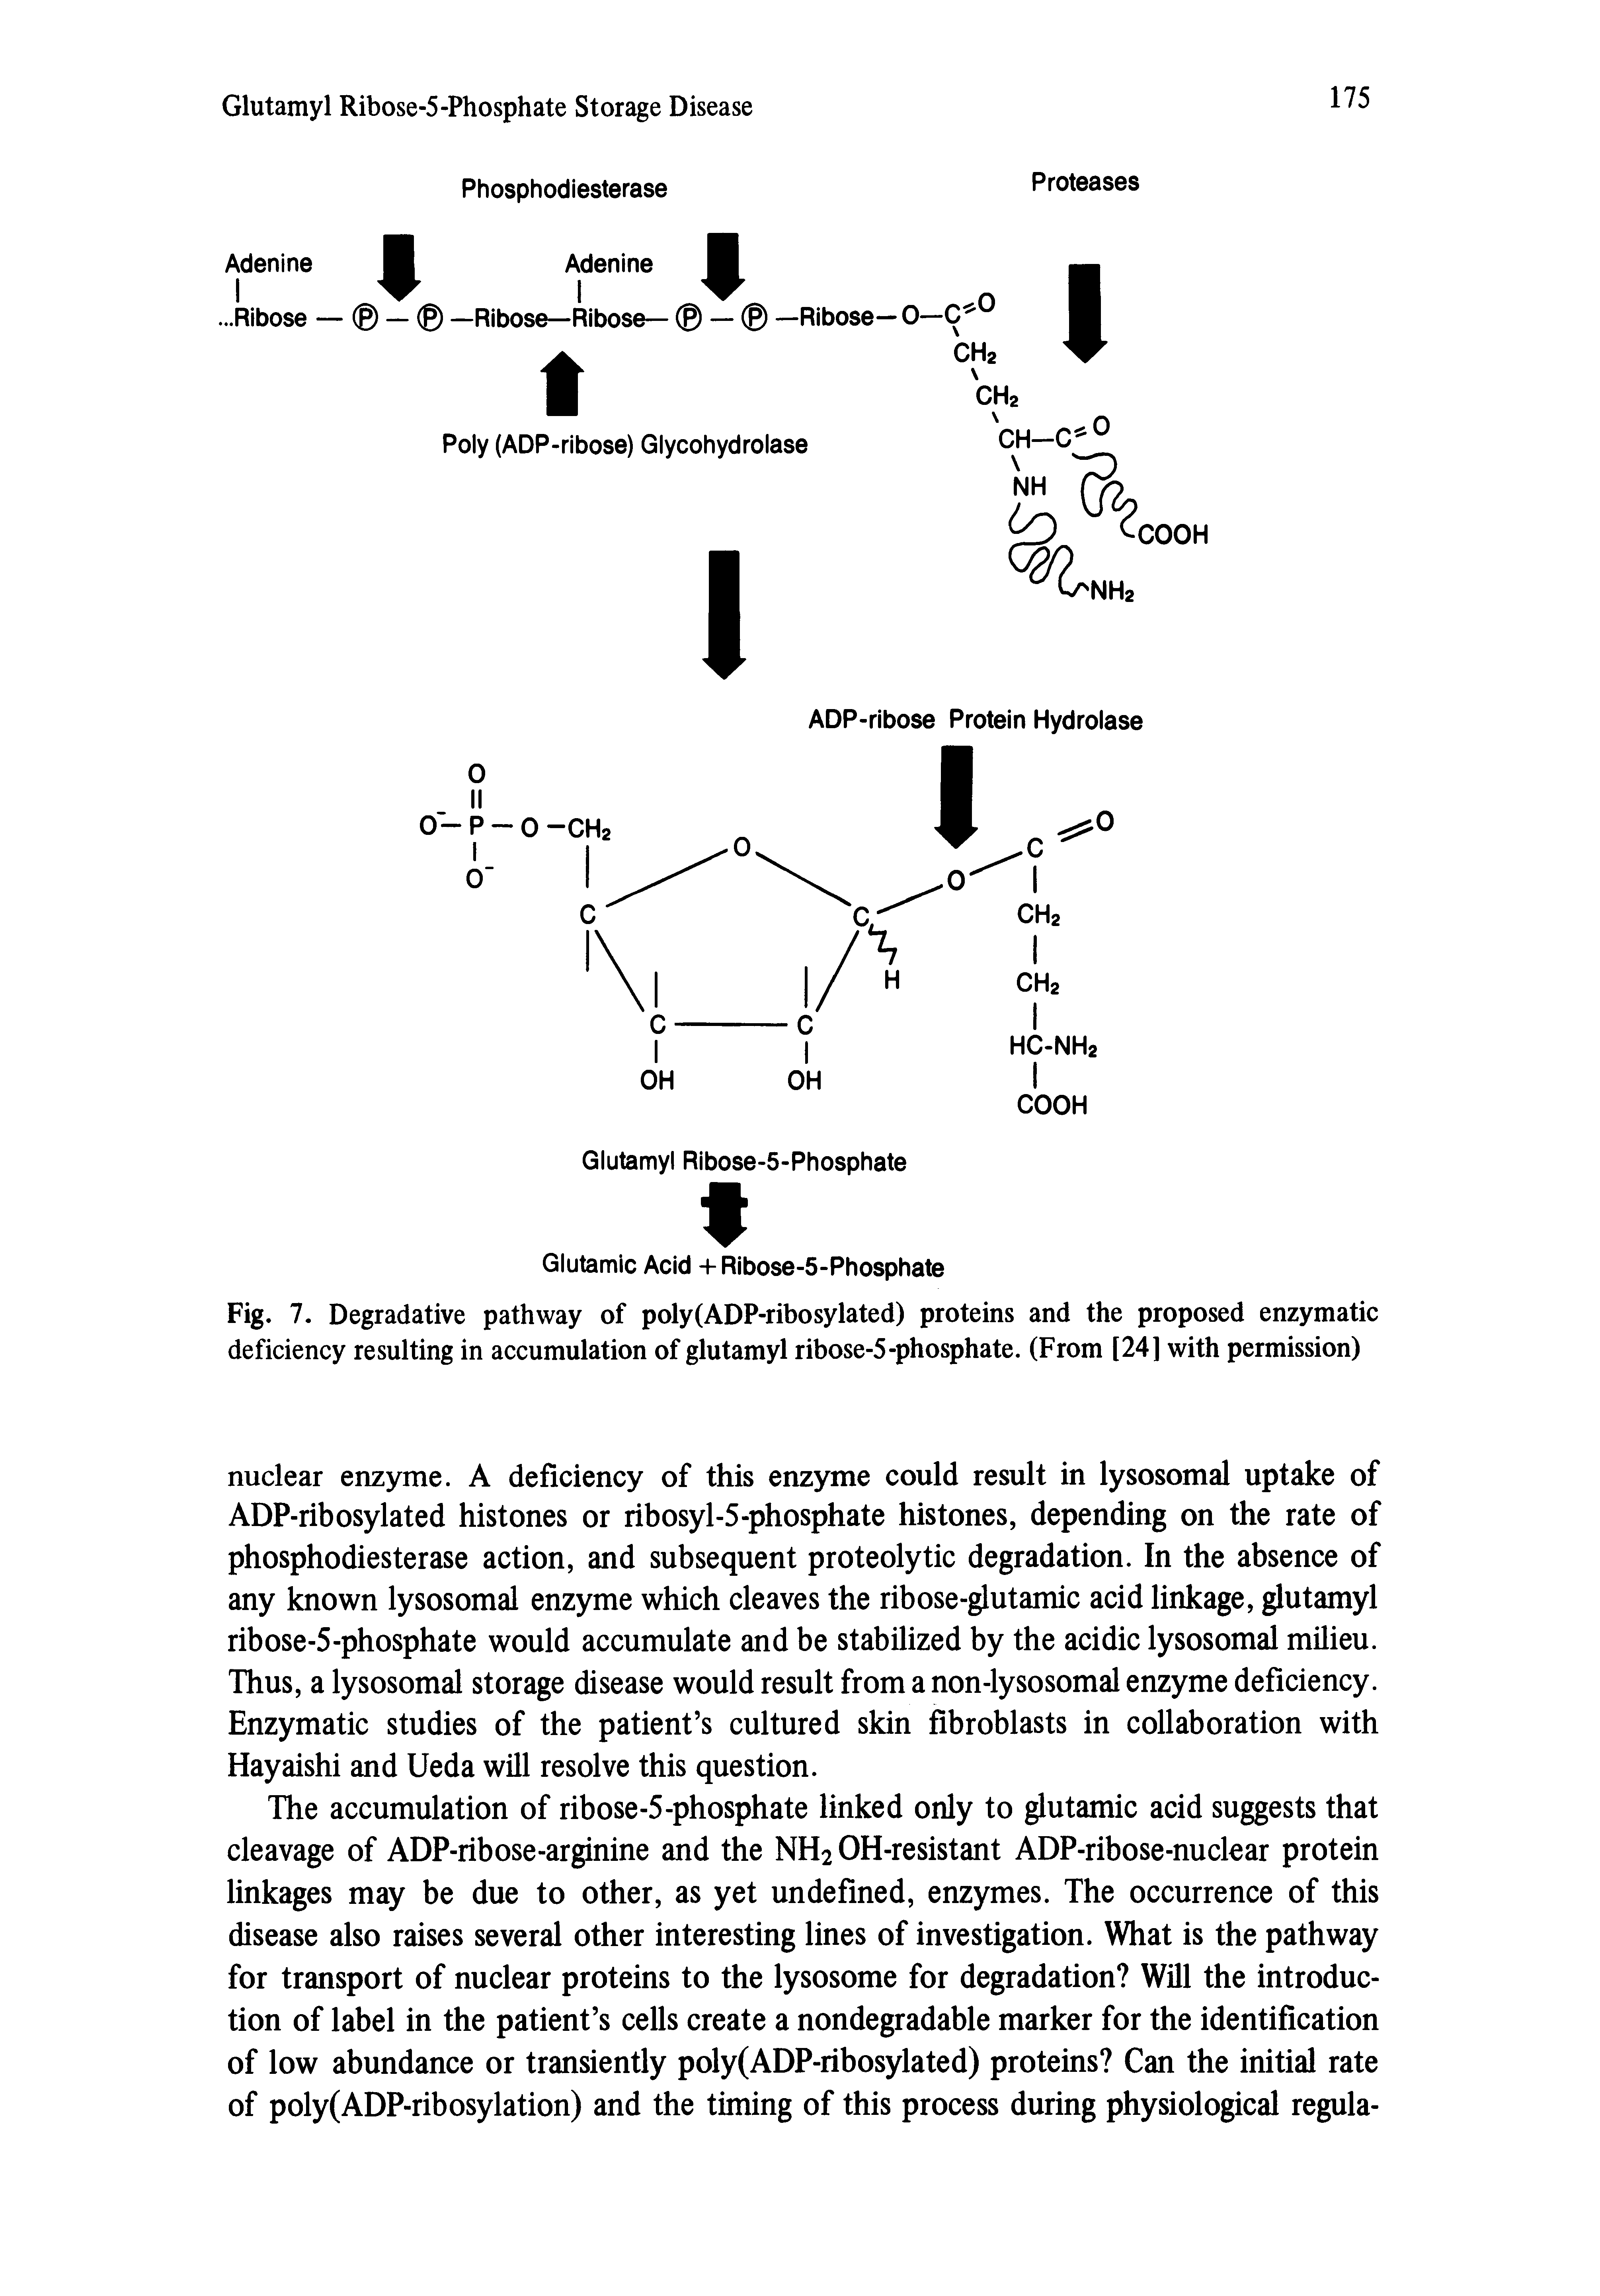 Fig. 7. Degradative pathway of poly(ADP-ribosylated) proteins and the proposed enzymatic deficiency resulting in accumulation of glutamyl ribose-5-phosphate. (From [24] with permission)...